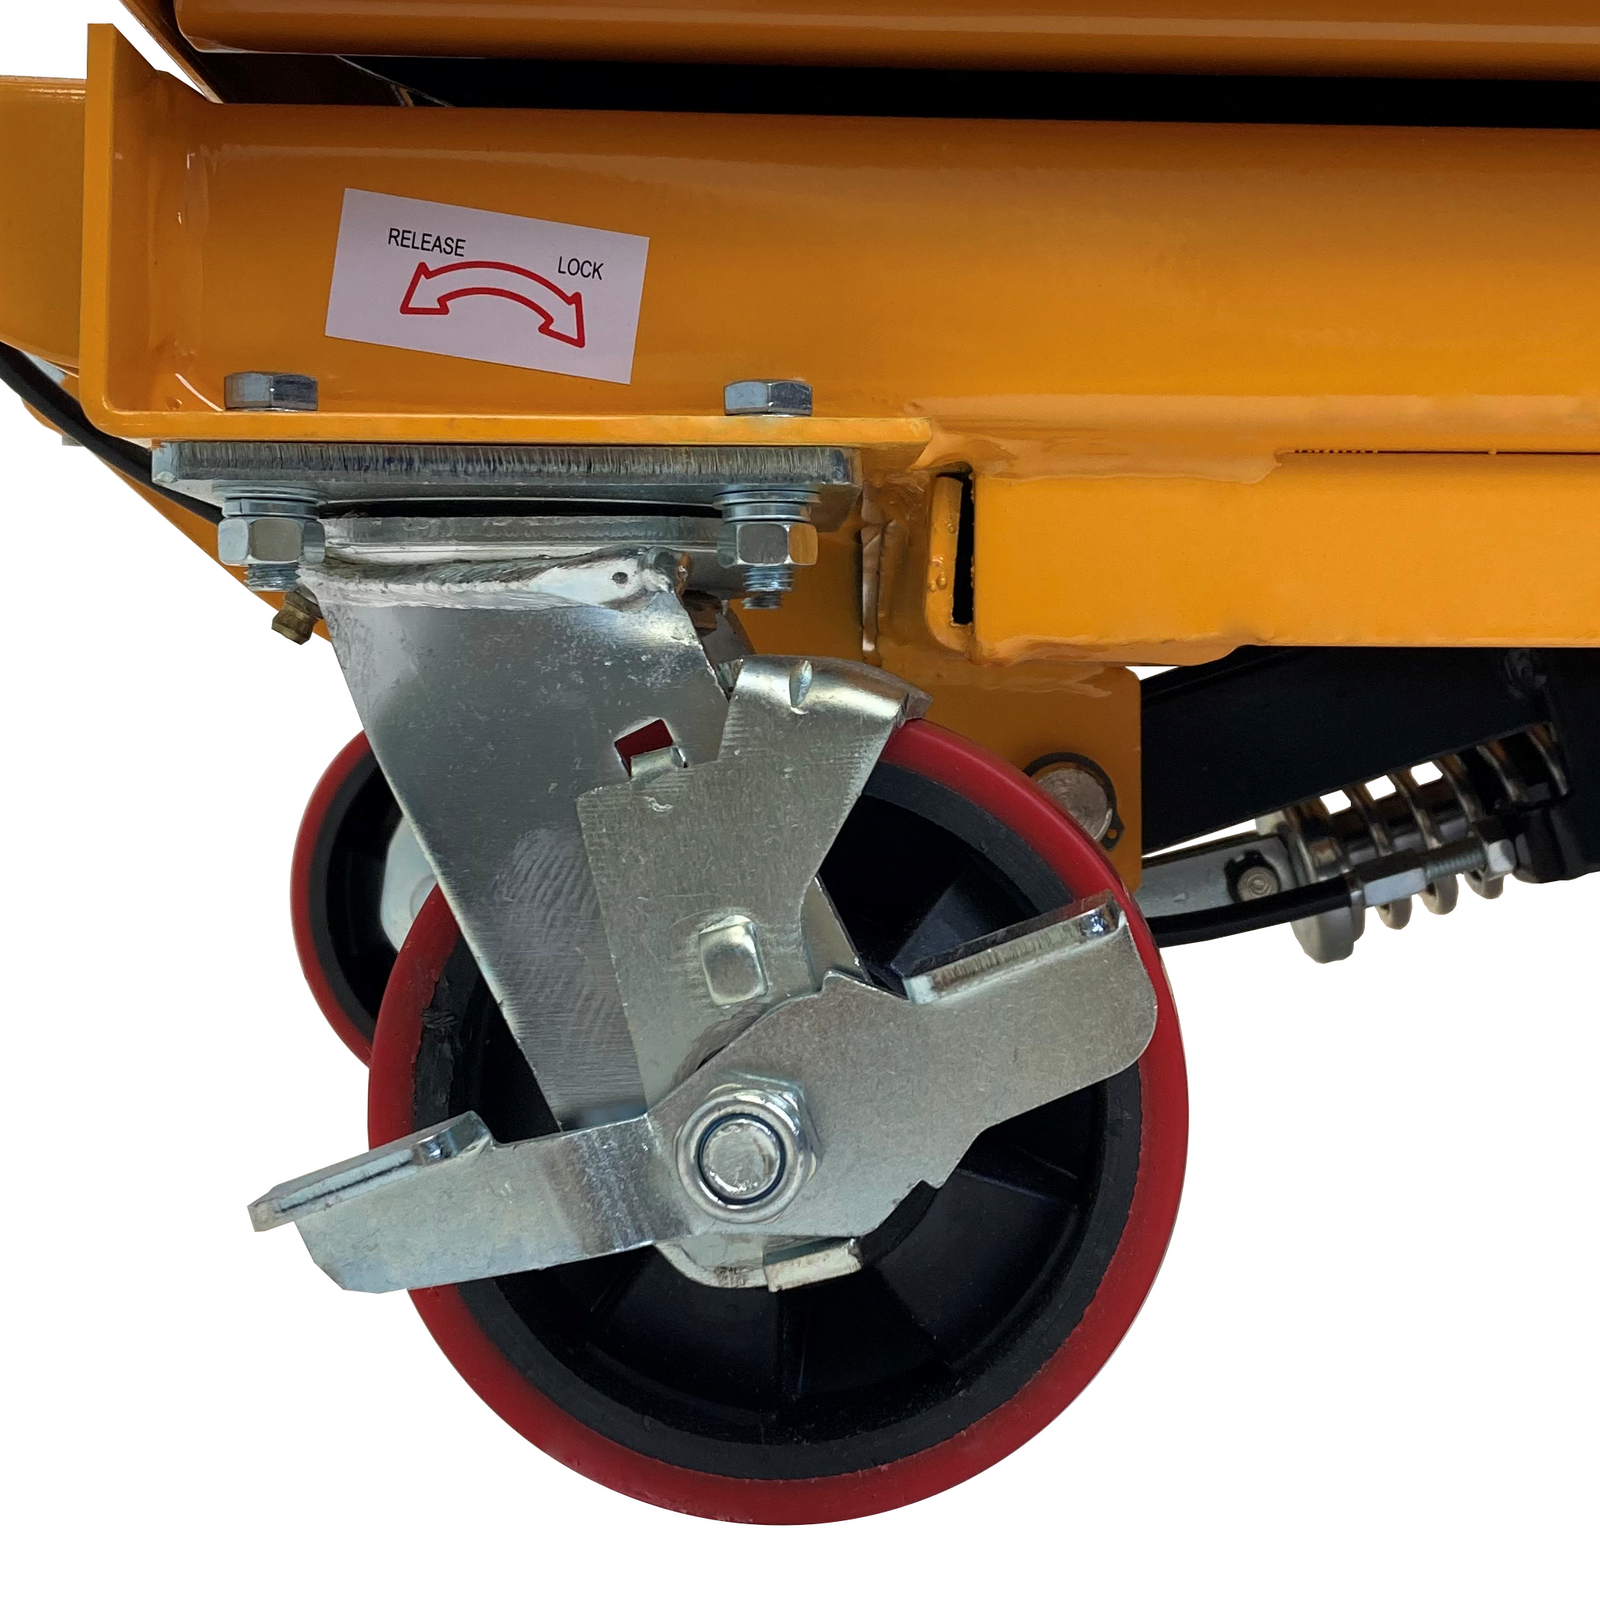 Close up of one of the rugged red back wheels with brakes of the mobile scissor lift table for 660 pounds. A sticker describes the position for the brake to be released and to be locked